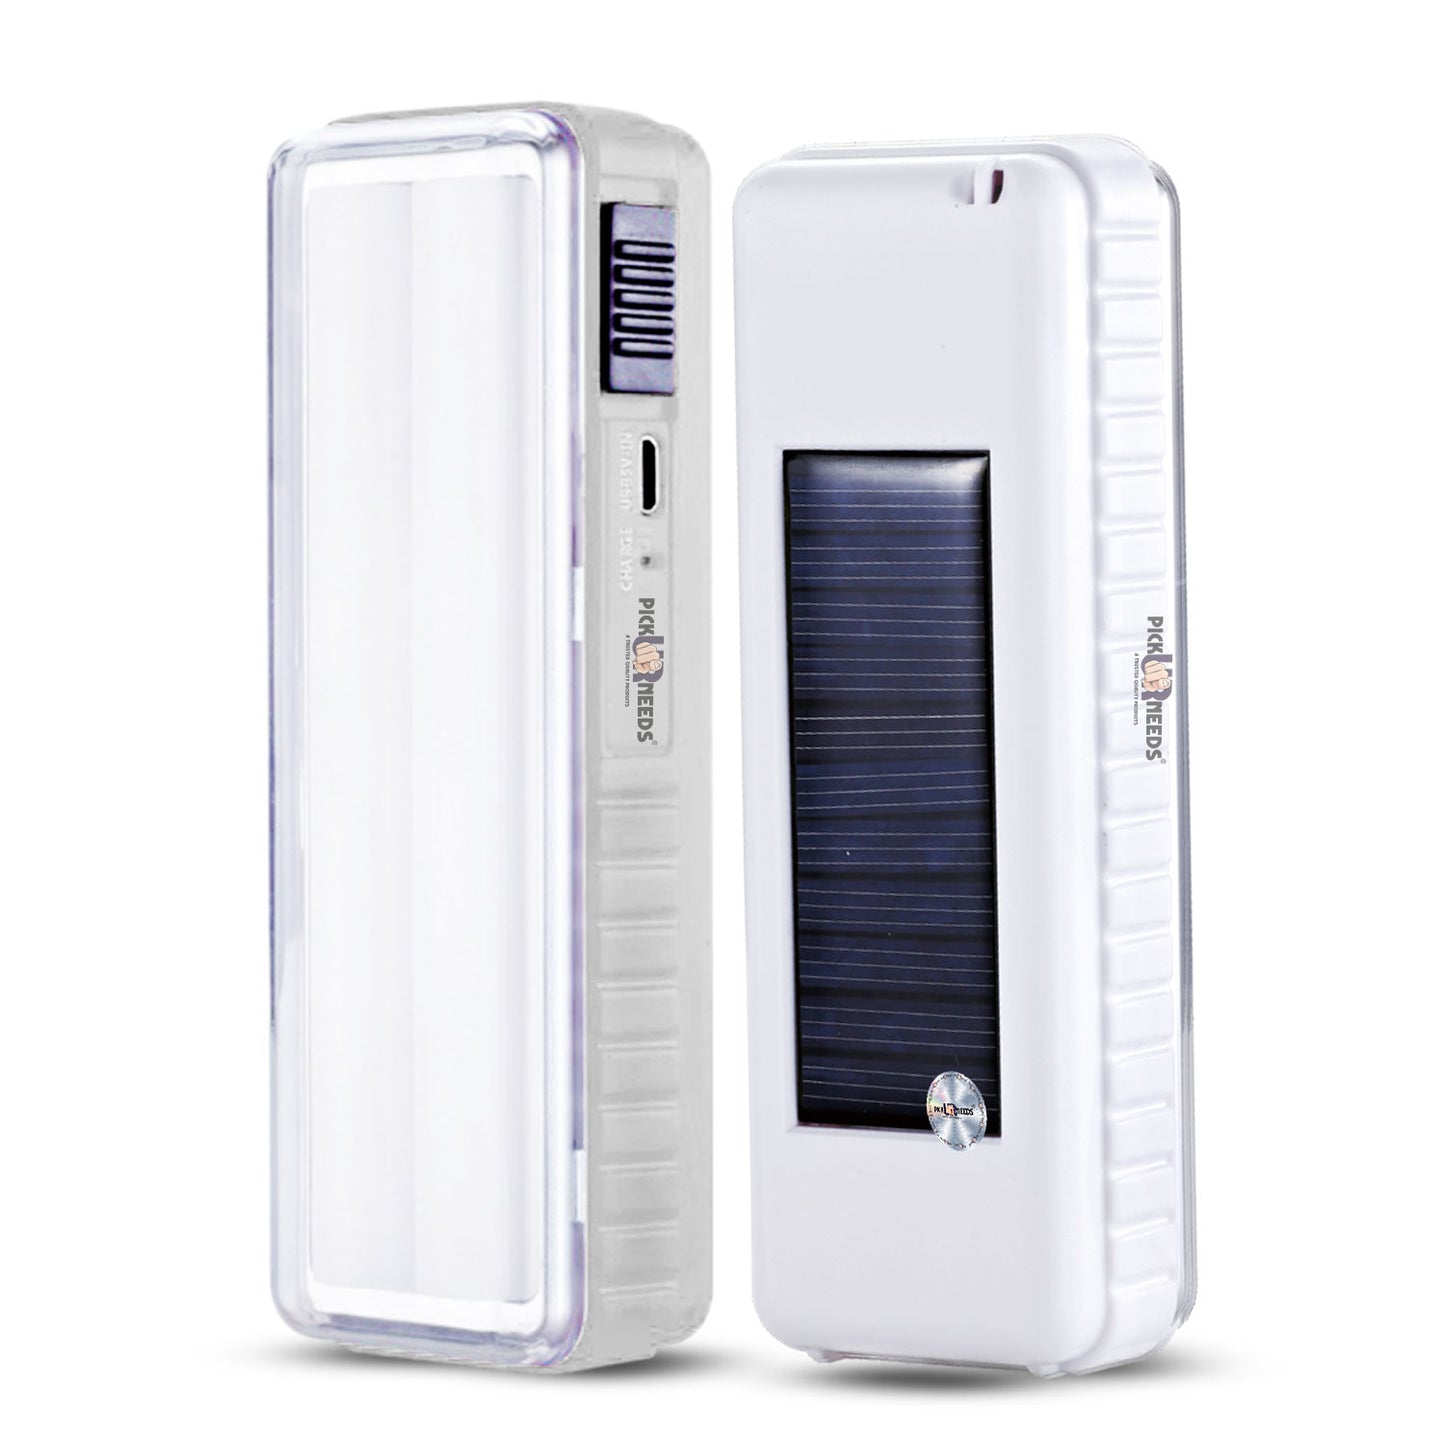 Pick Ur Needs Solar Emergency Rechargeable Mini Home Lantern Light (2 Tube) With Lithium Battery